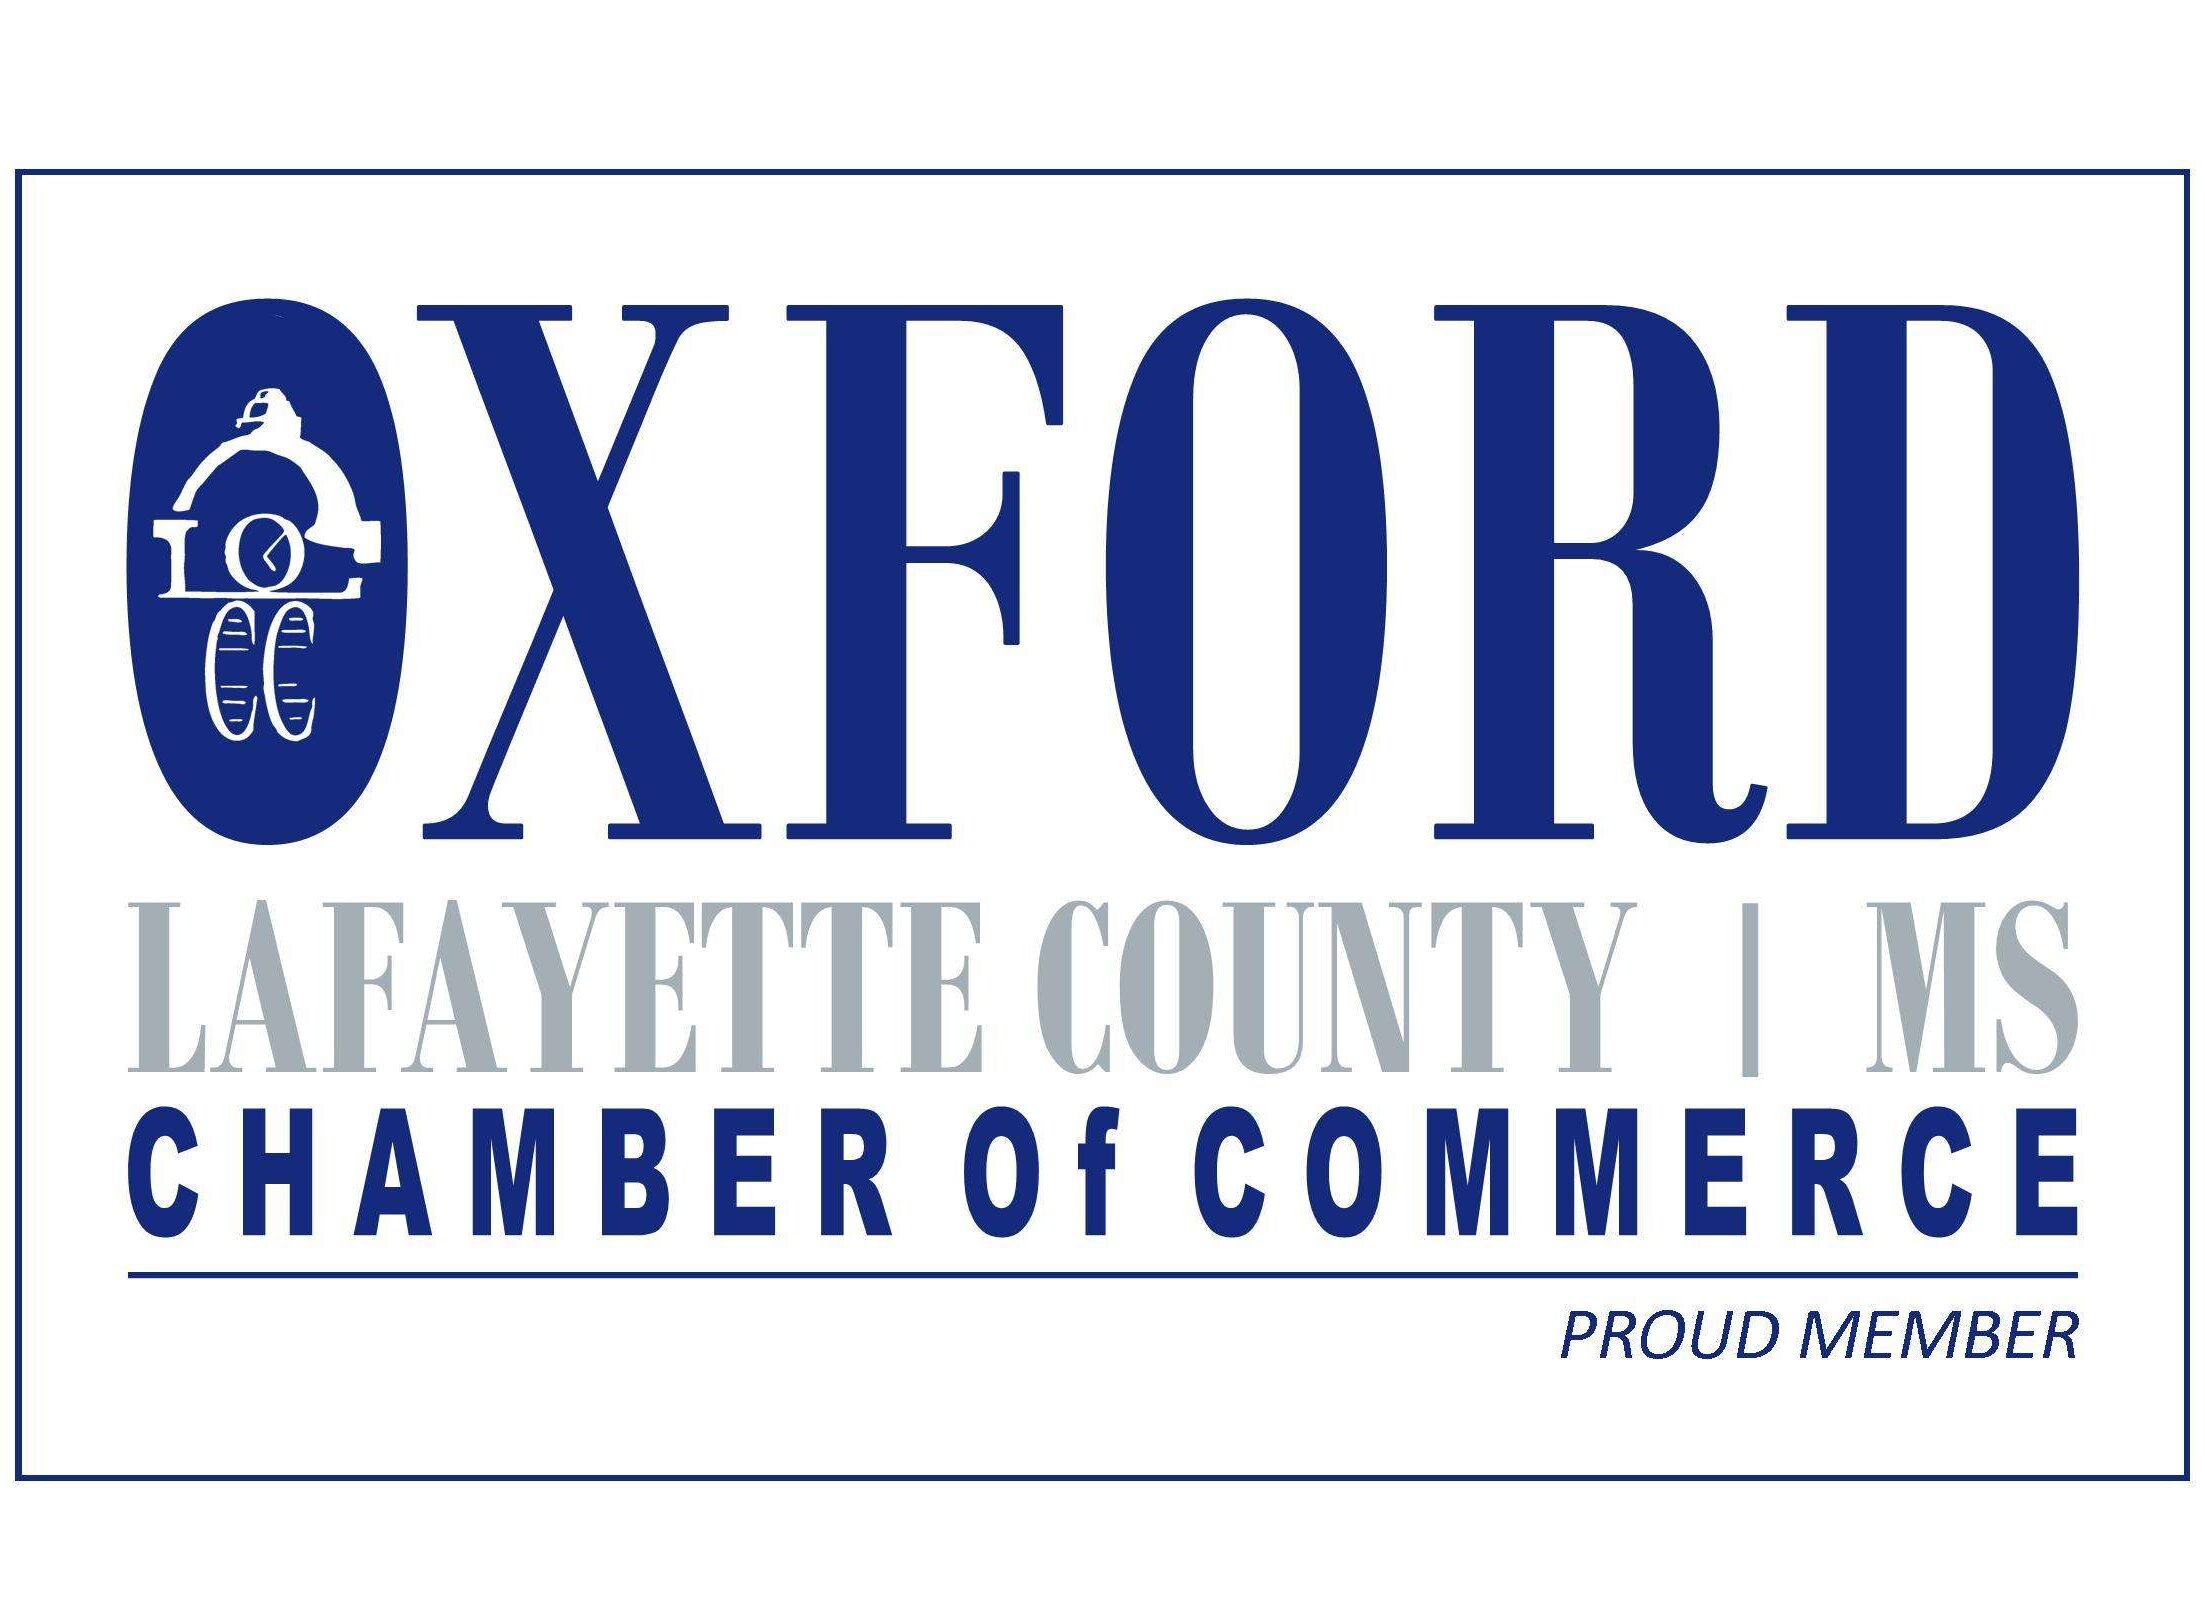 Oxford Lafayette County, MS Chamber of Commerce member